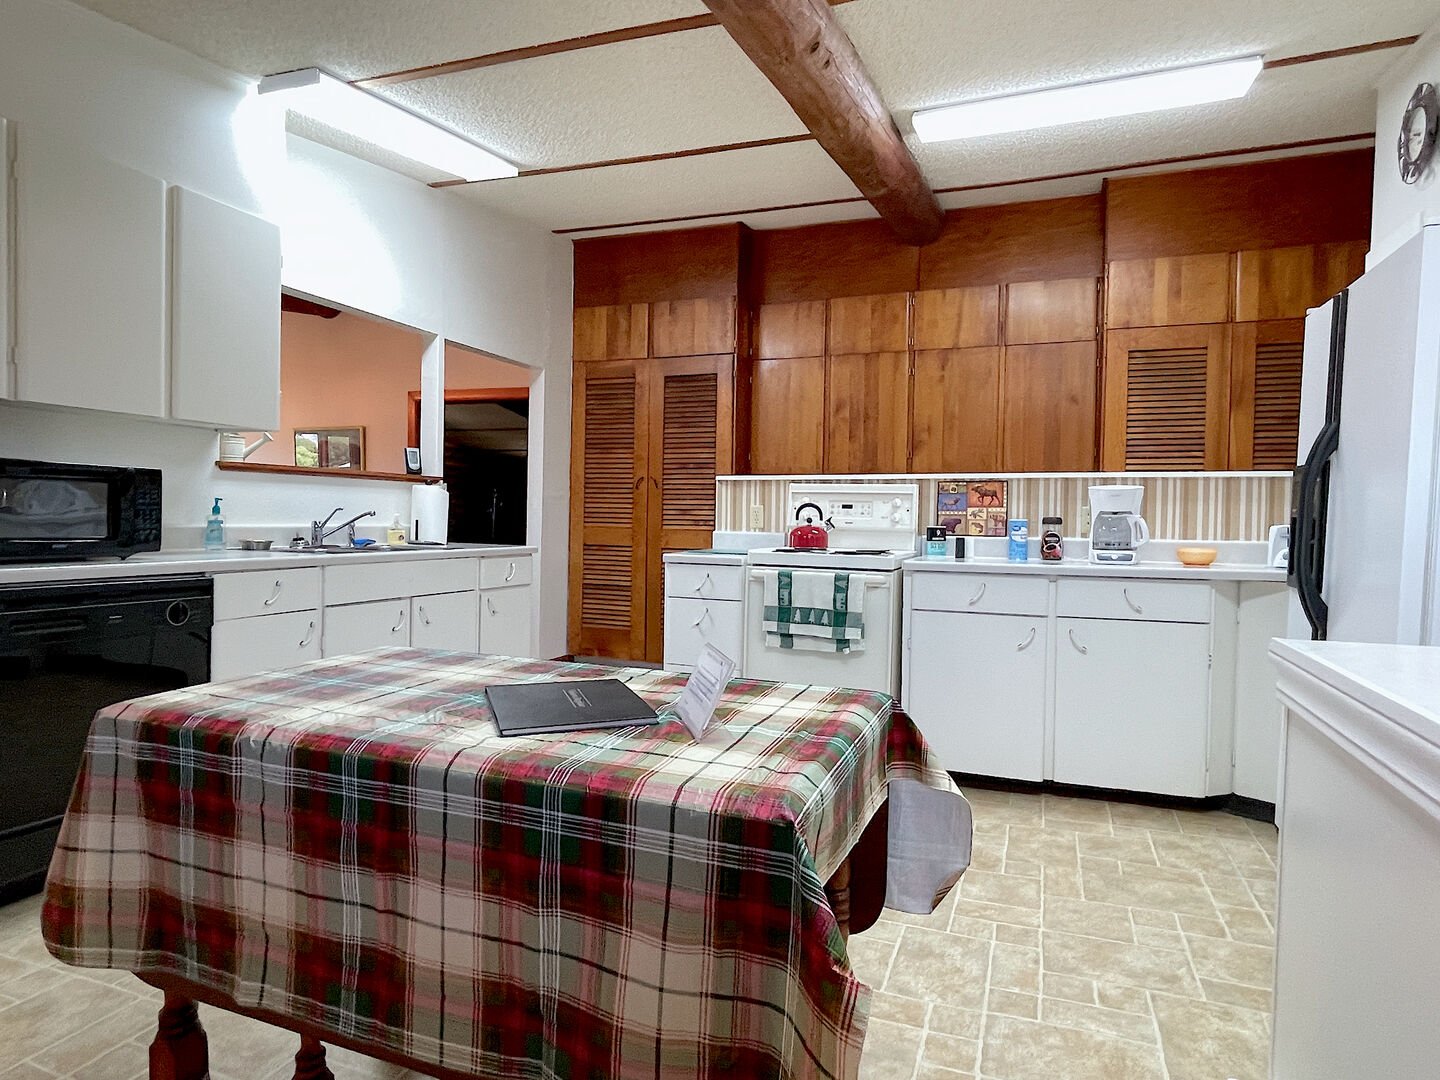 Kitchen Area with full size appliances